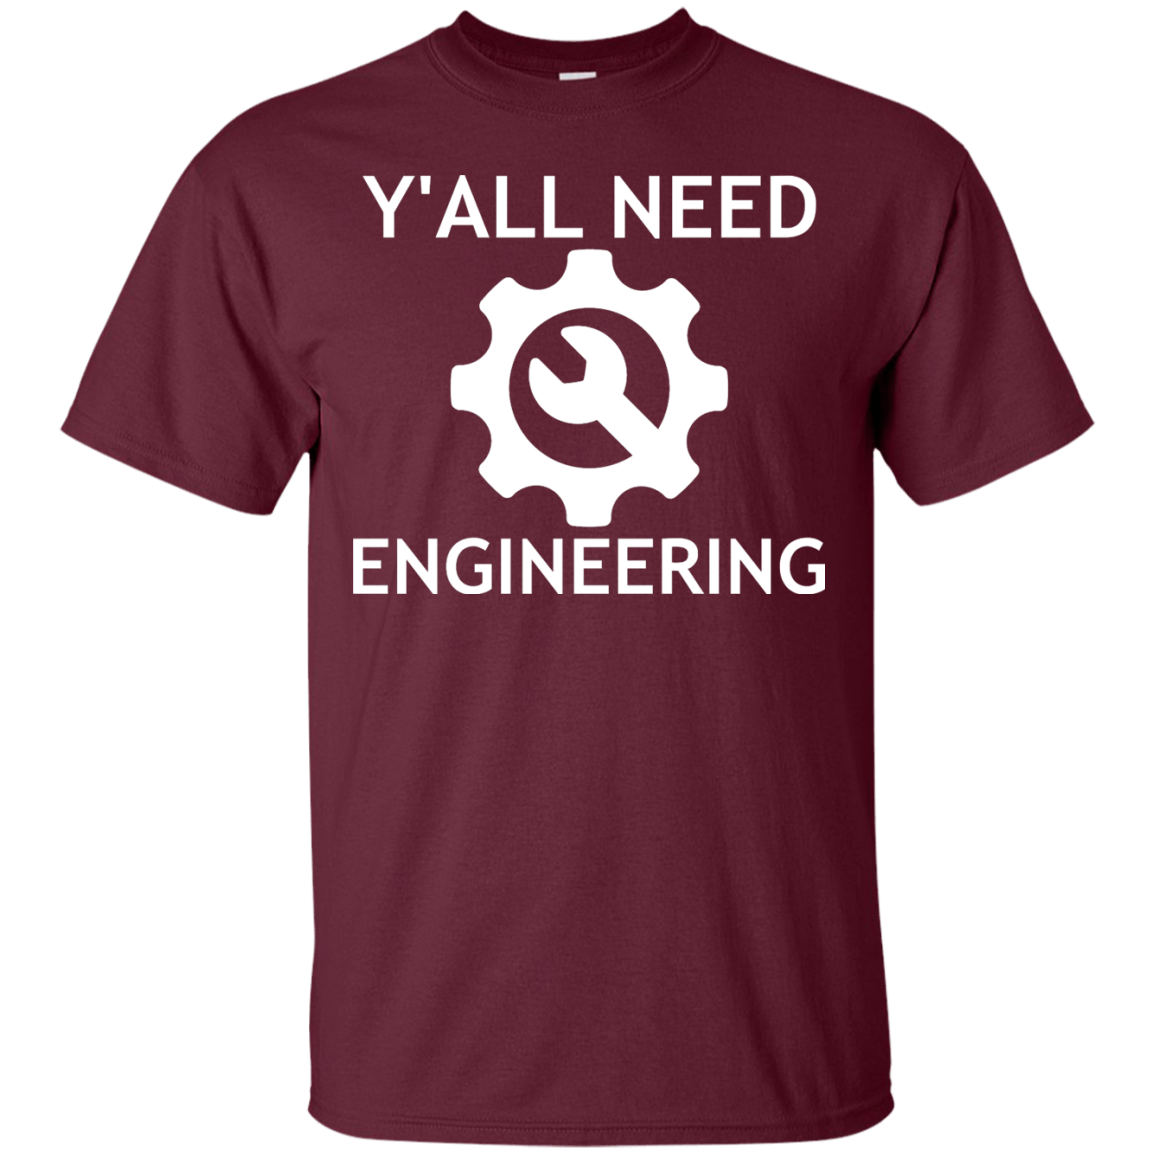 Y'all Need Engineering - Engineering Outfitters